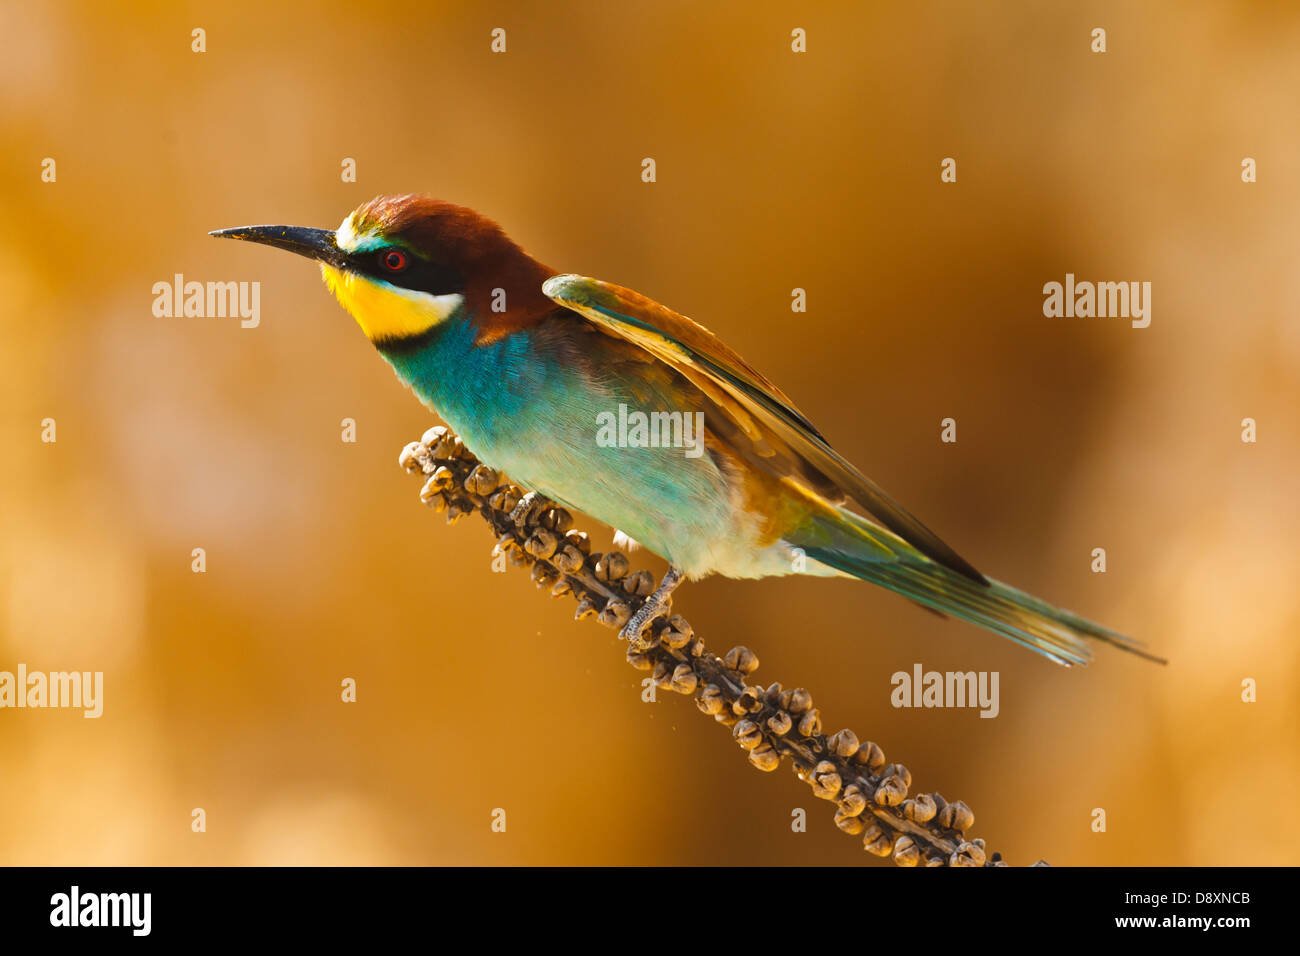 European bee-eater on a branch, Merops apiaster. Shallow depth of field and bakground blurred Stock Photo